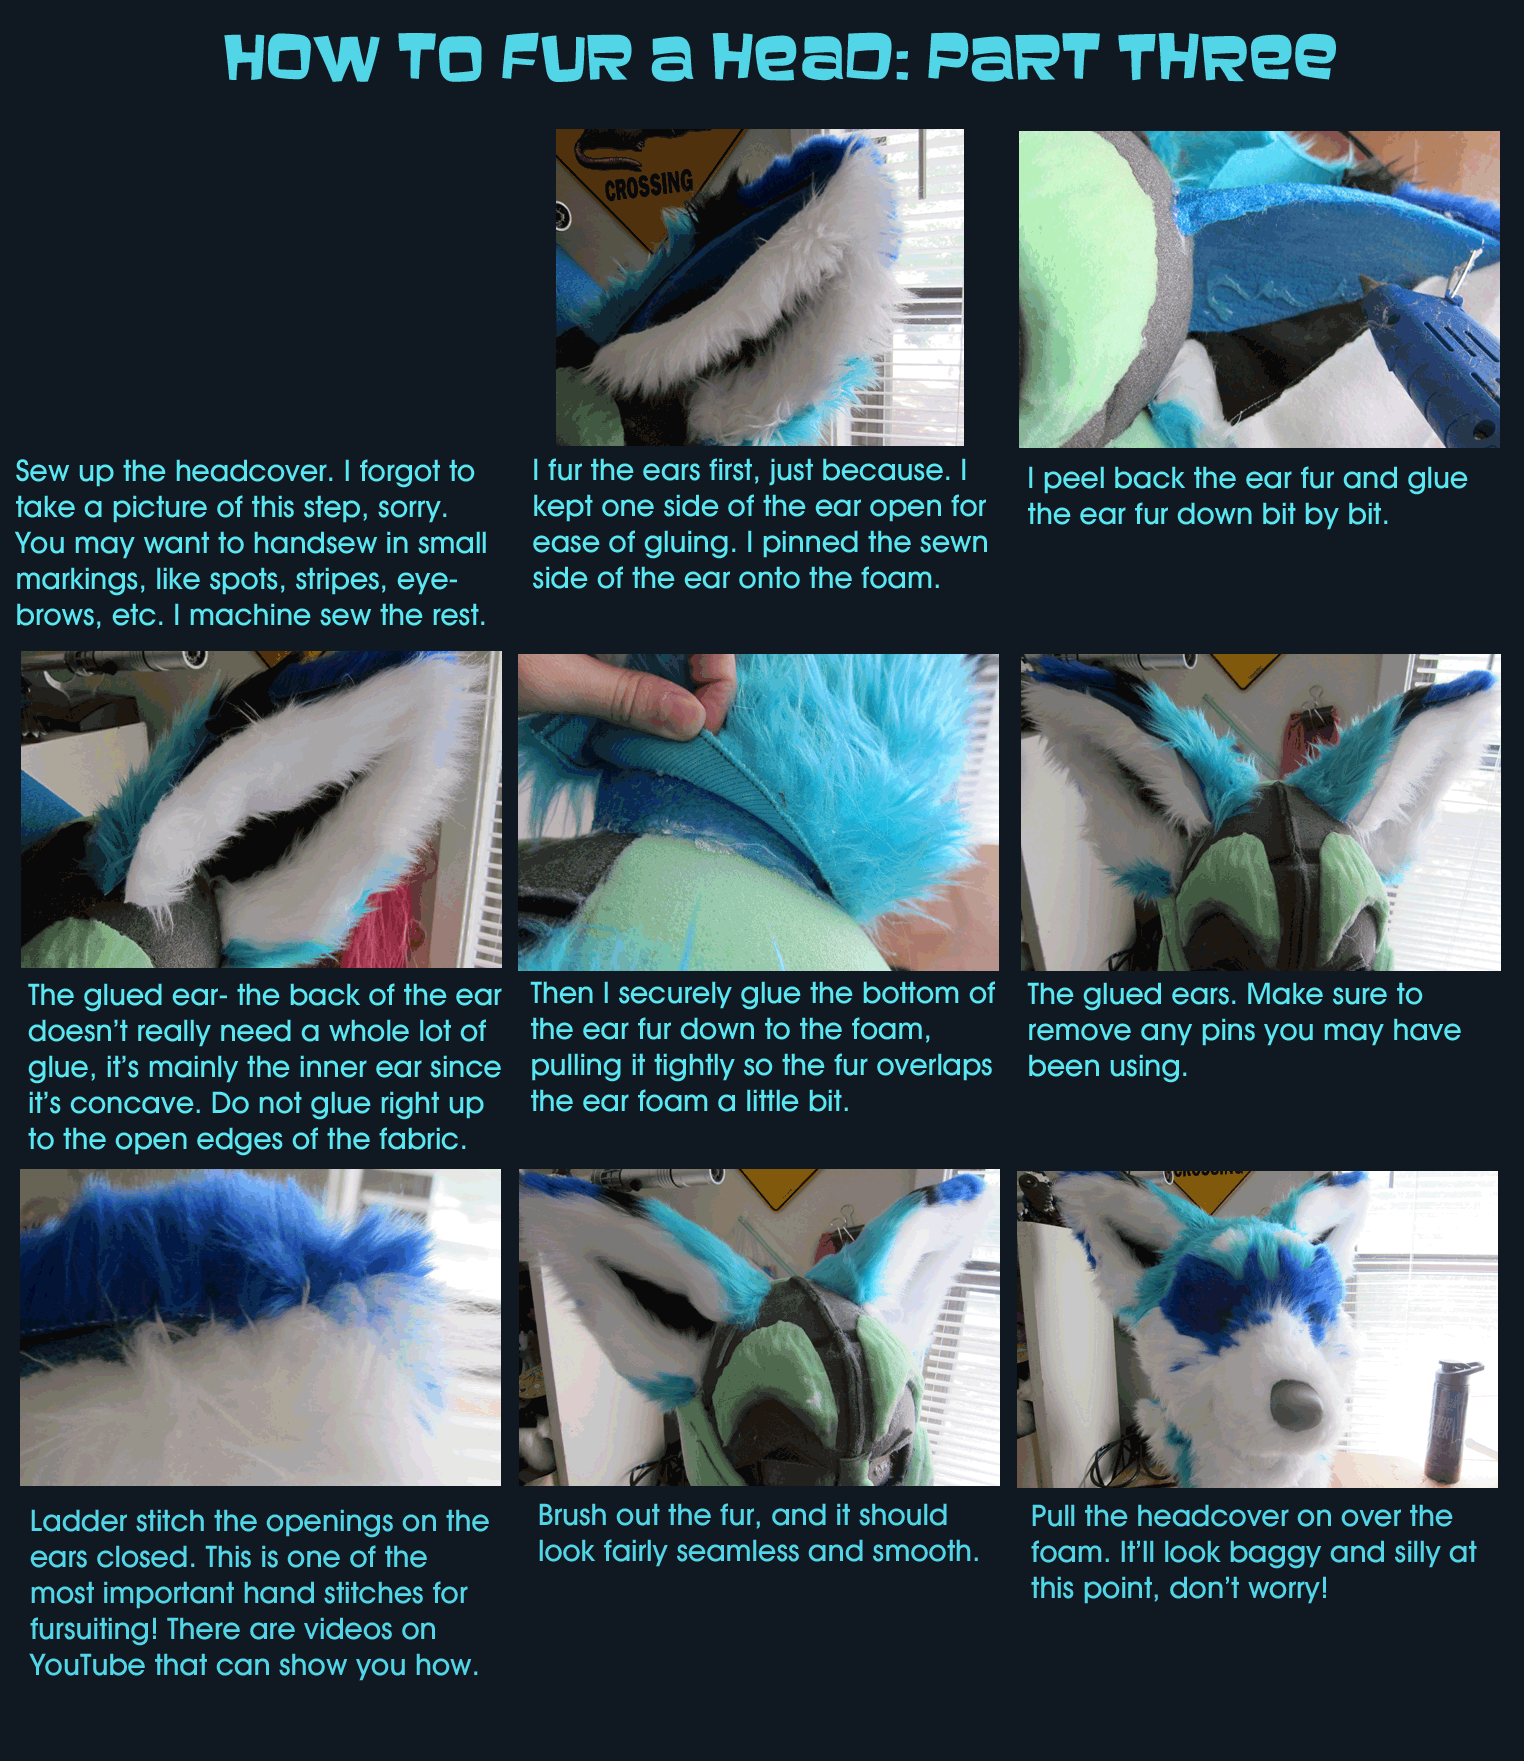 How to Fur a Head pt 3